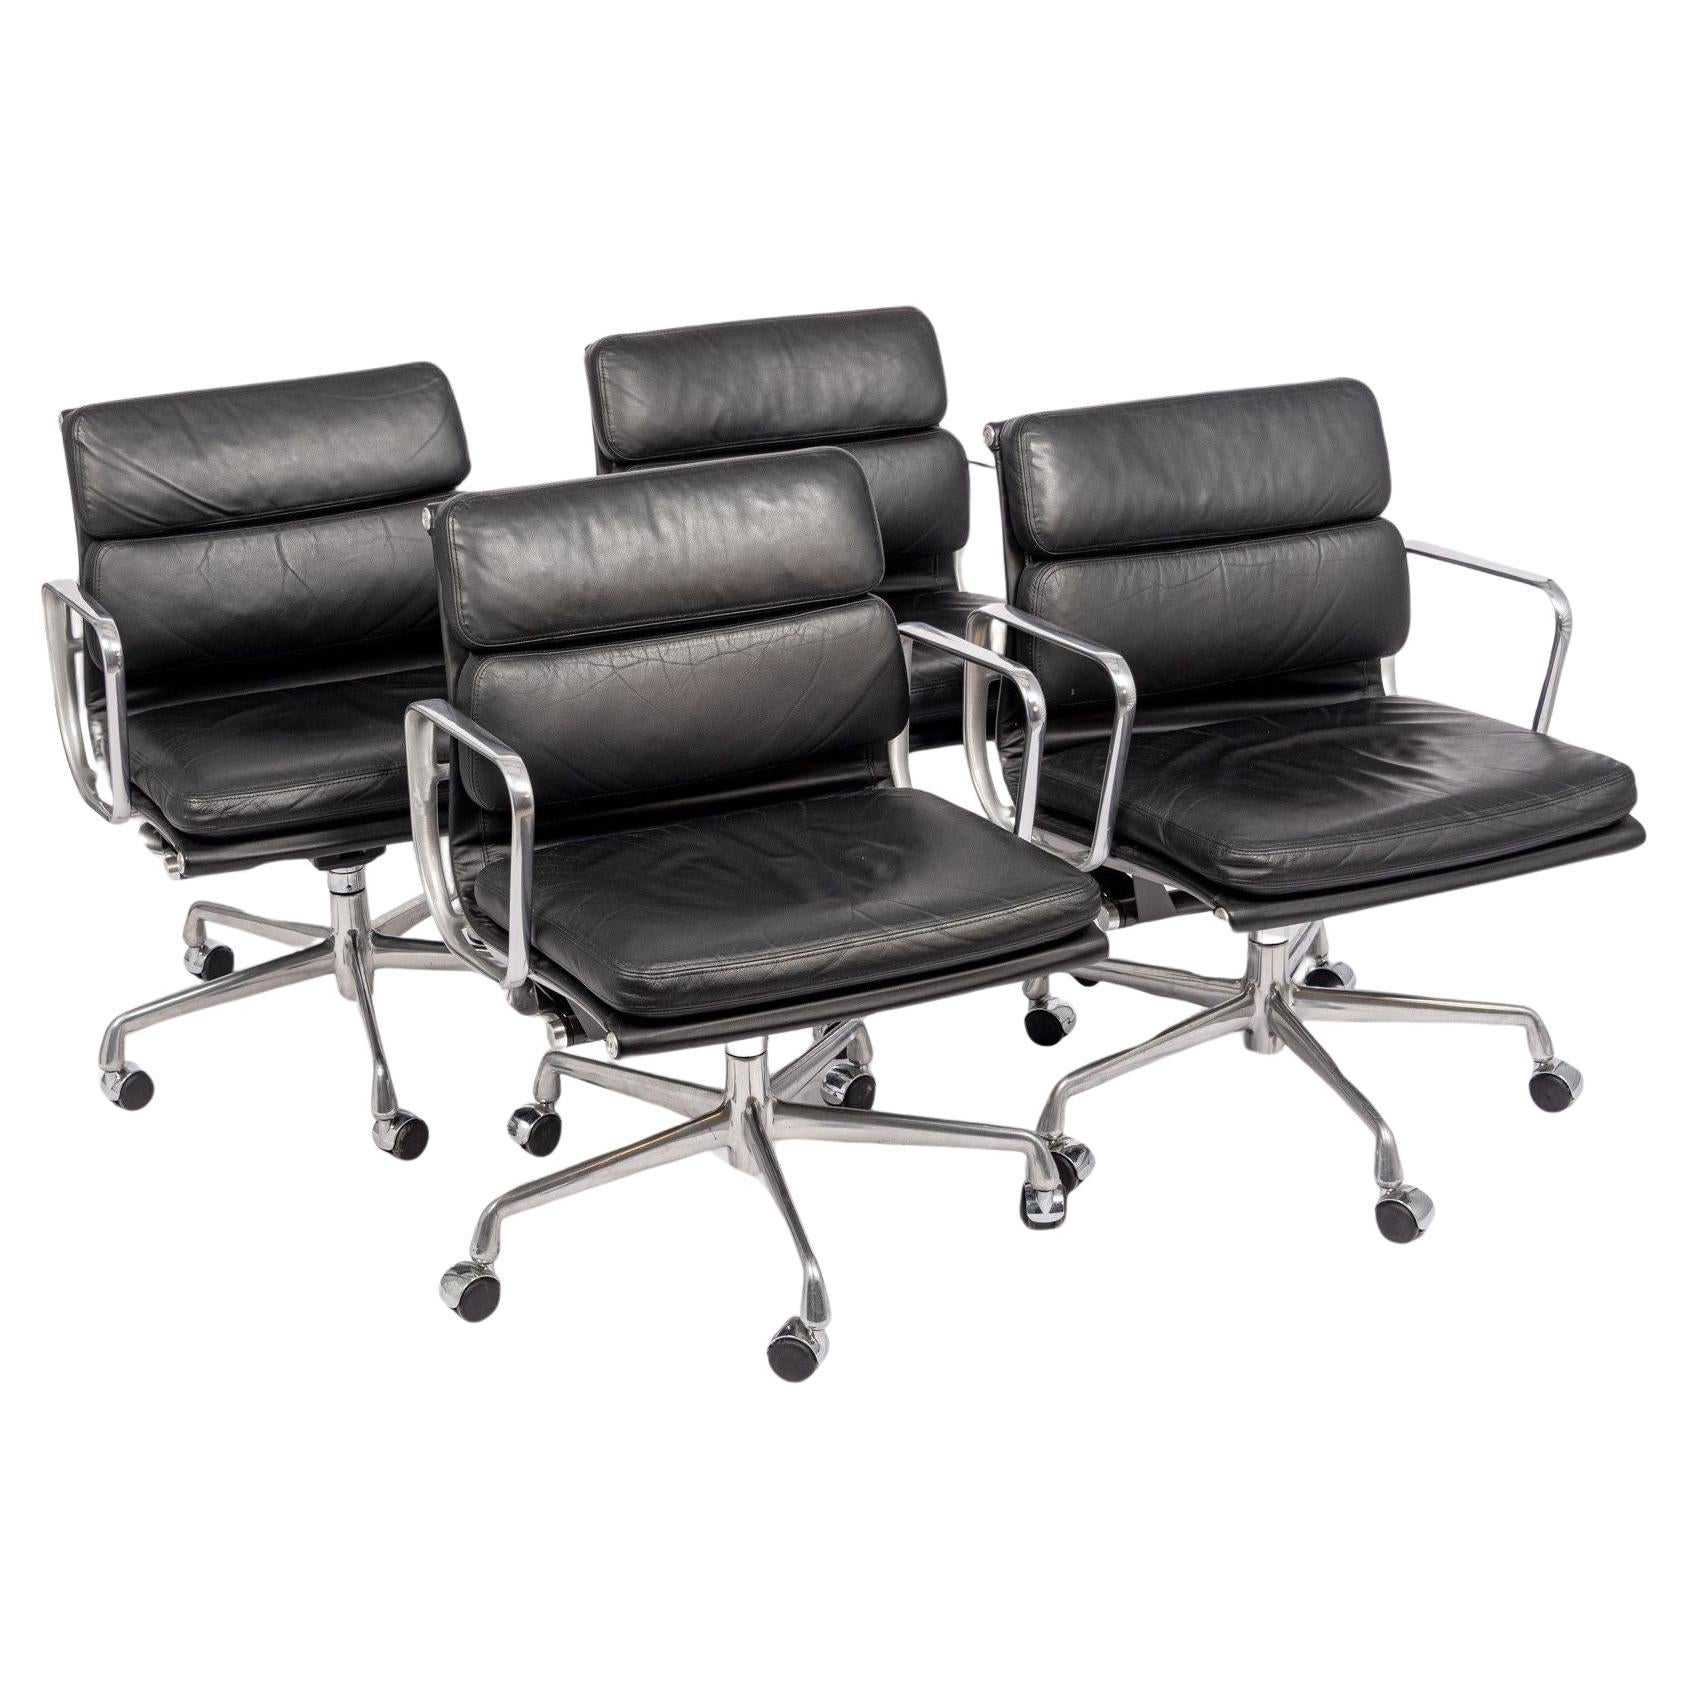 2001 Eames Herman Miller Black Leather Desk Chairs Aluminum Group For Sale